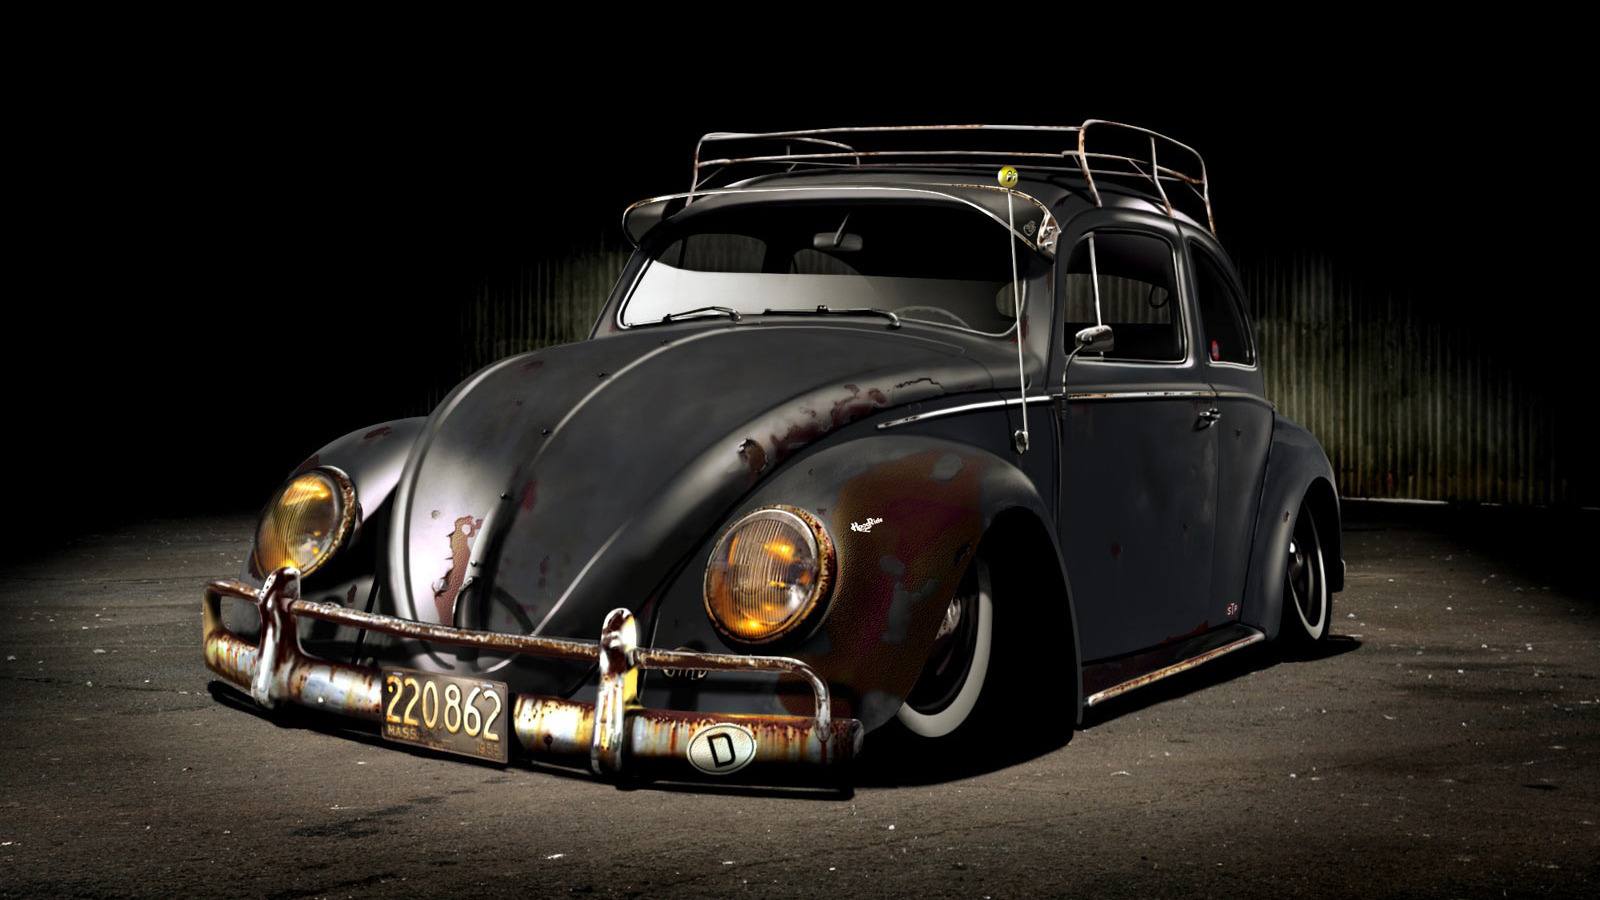 Cars Wallpapers on Old Cars Bug Vehicles Rat Rod Car Beatle Hd Wallpaper   Insects   Bugs